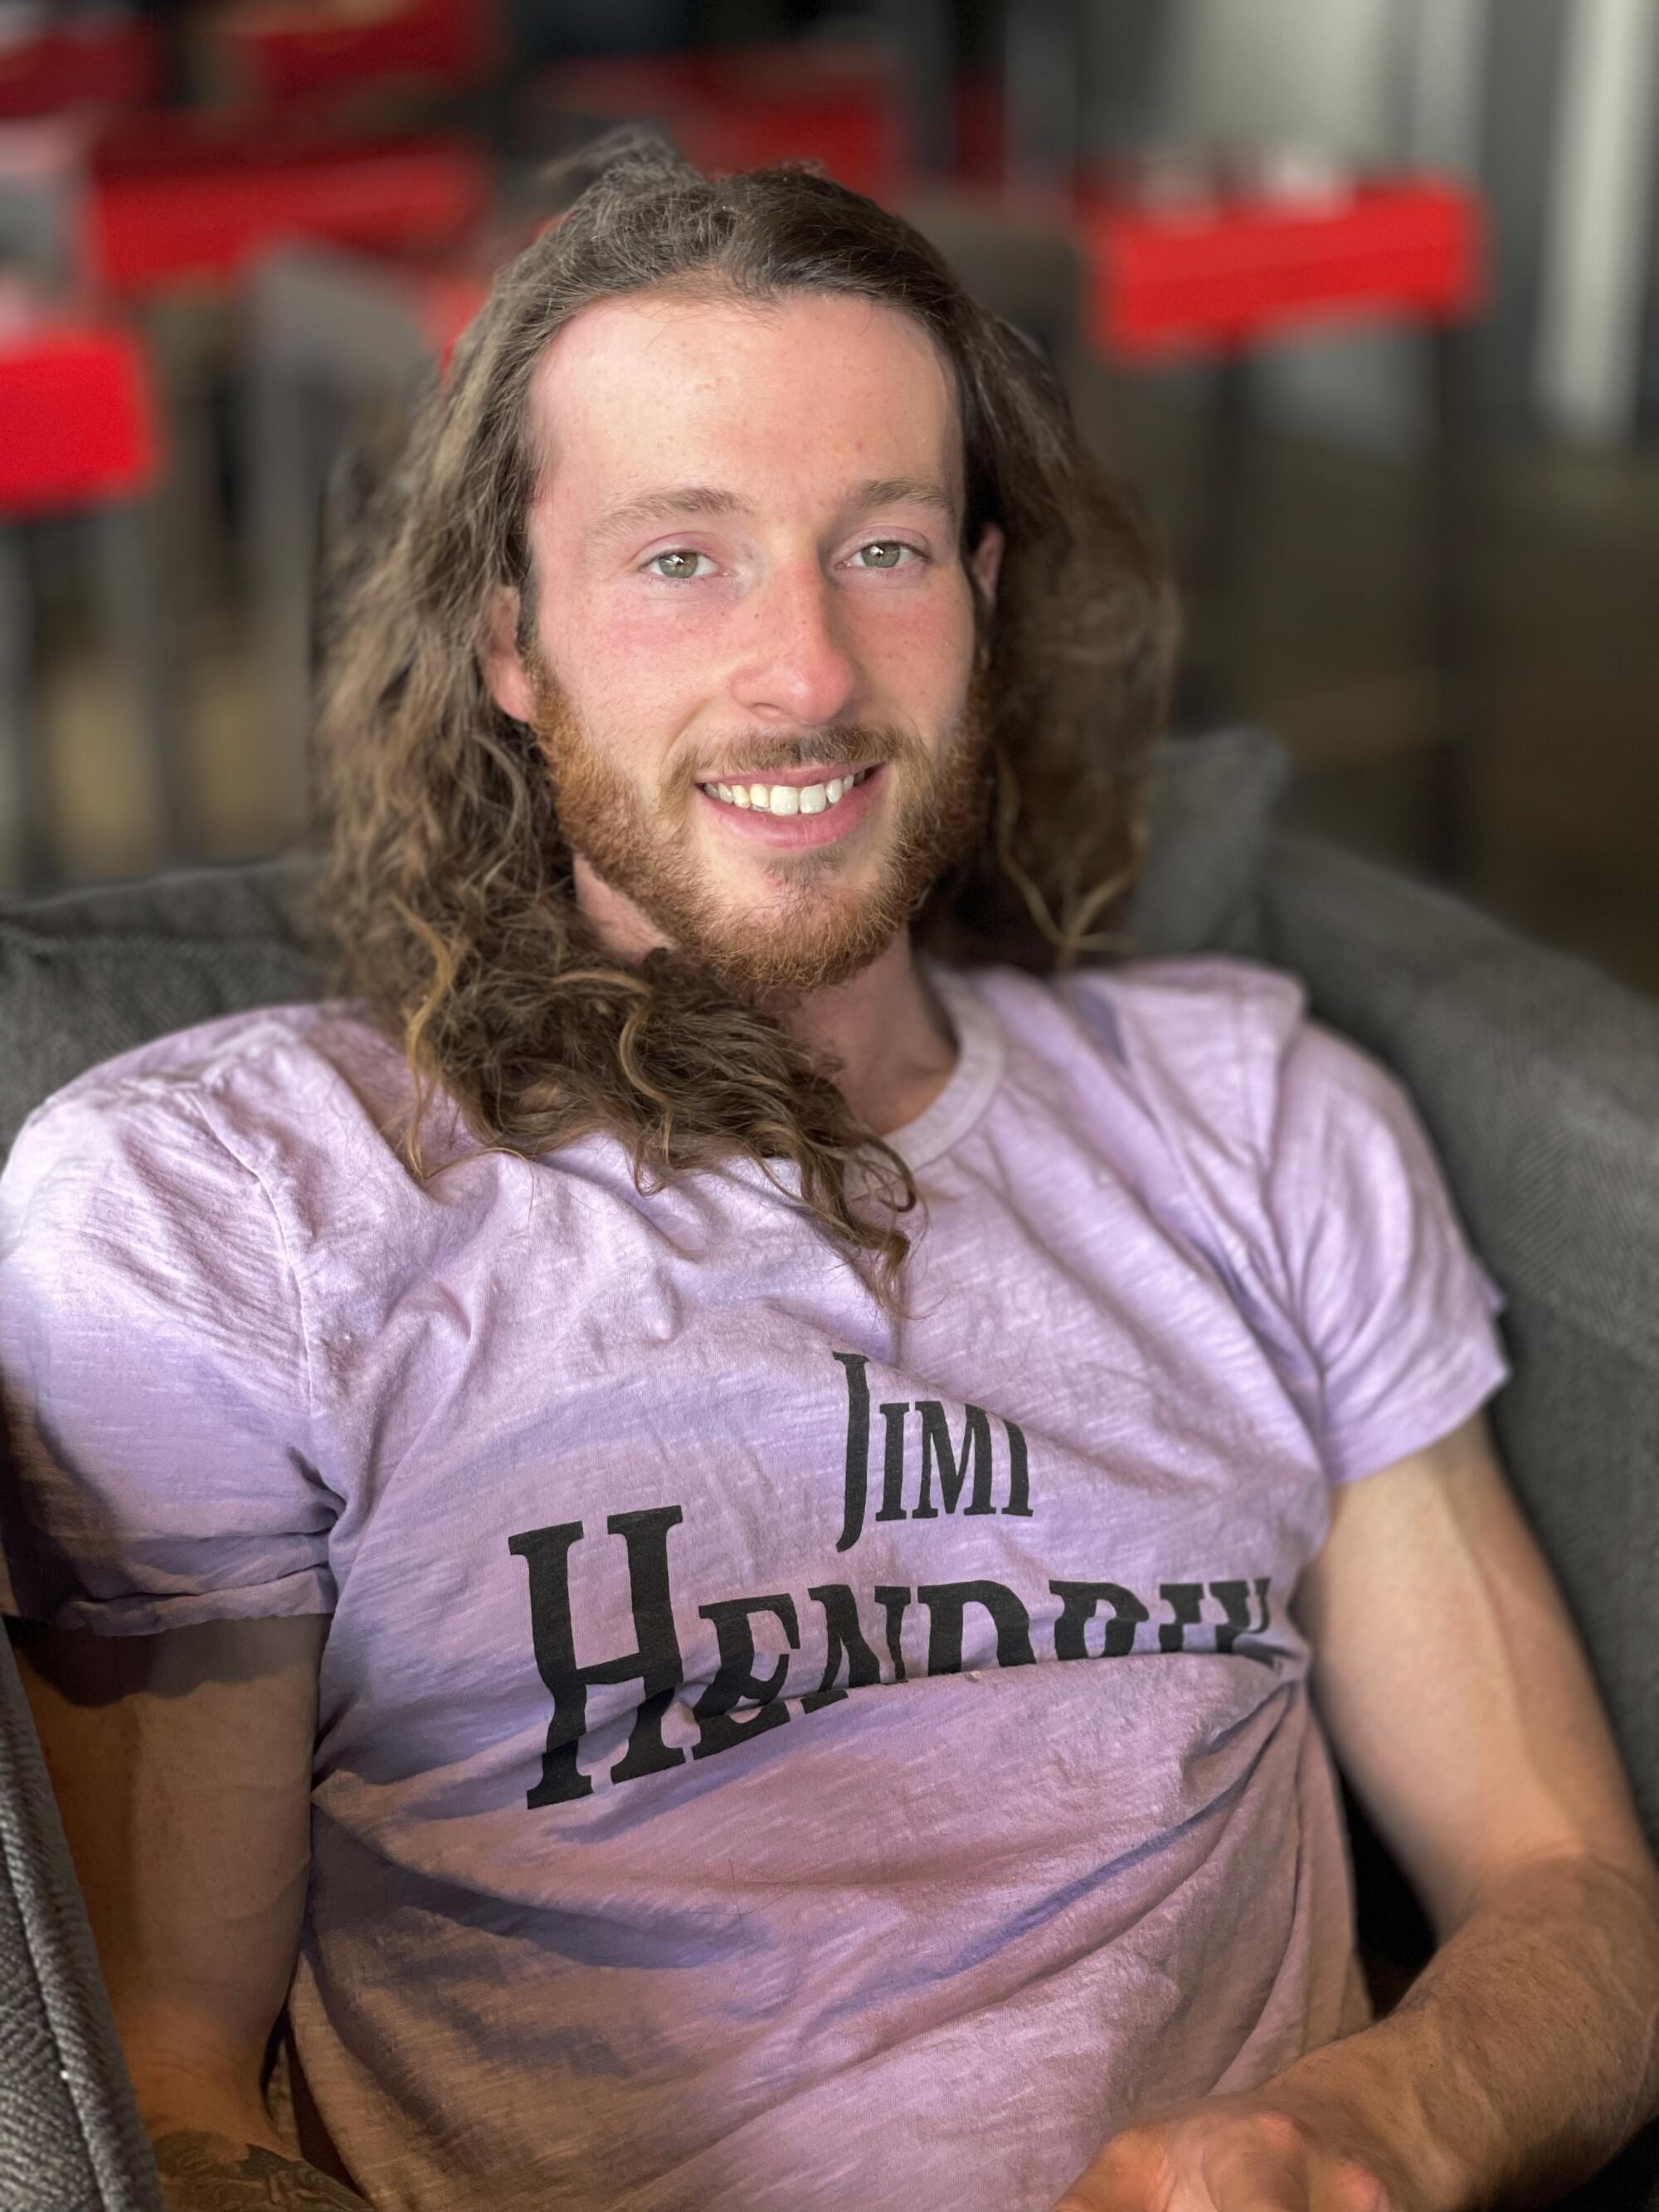 A bearded man with long, wavy brown hair and wearing a pale pink T-shirt sits smiling